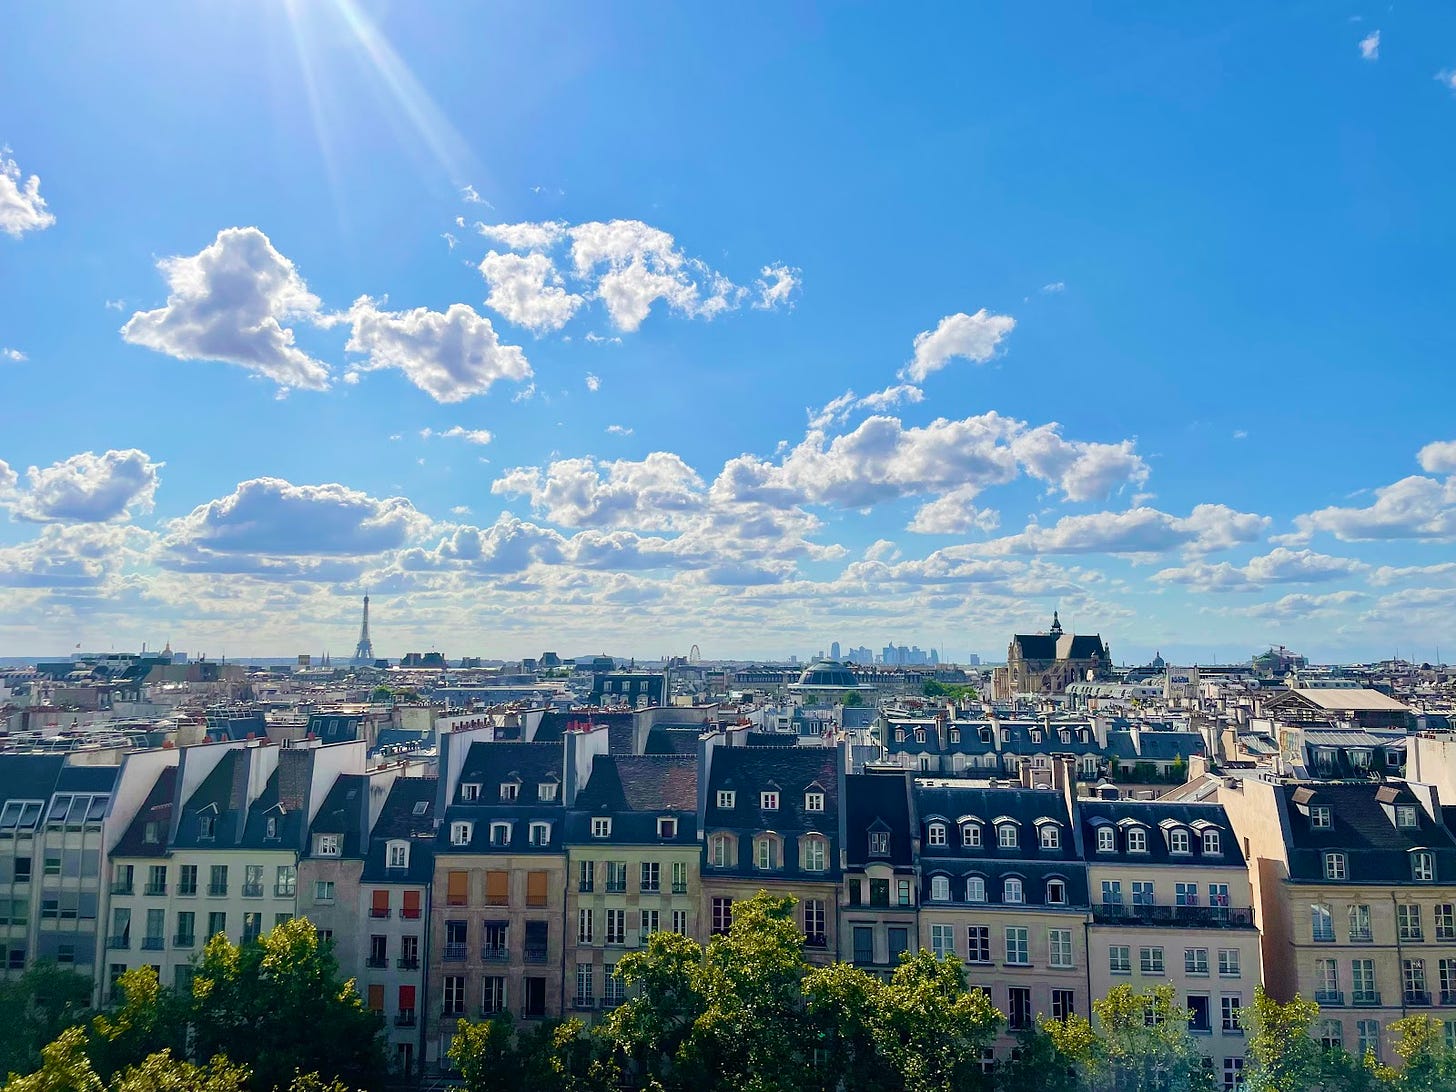 Paris, France, July 2022, a skyline of Paris with the Effiel Tower in the distant left hand corner with a blue sunny sky and city buildings in the foreground